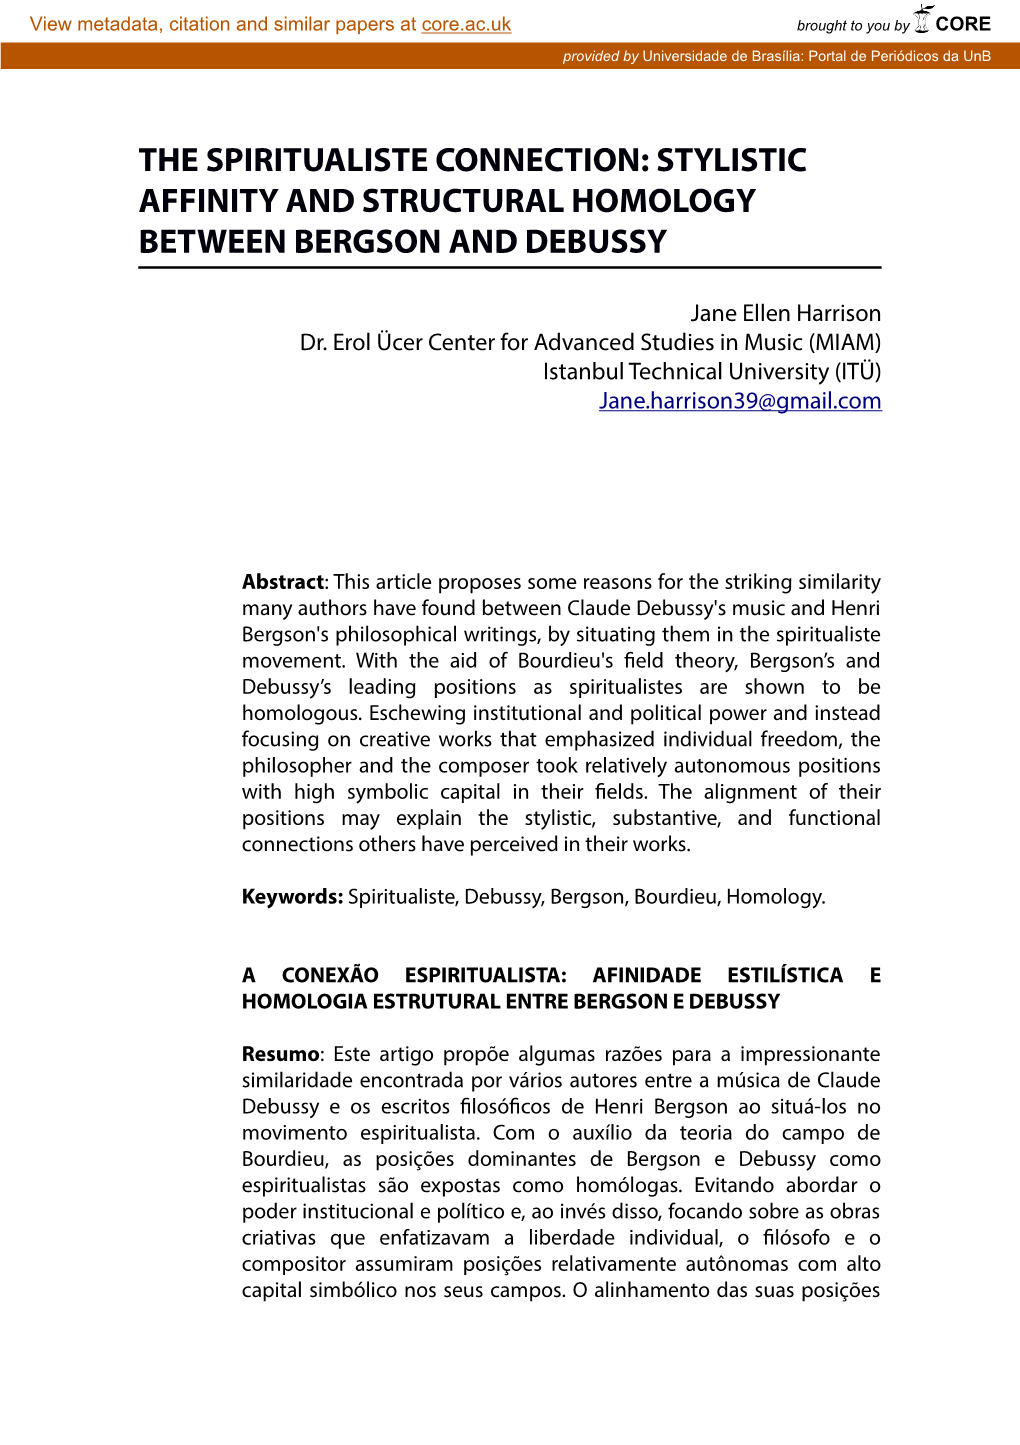 Stylistic Affinity and Structural Homology Between Bergson and Debussy